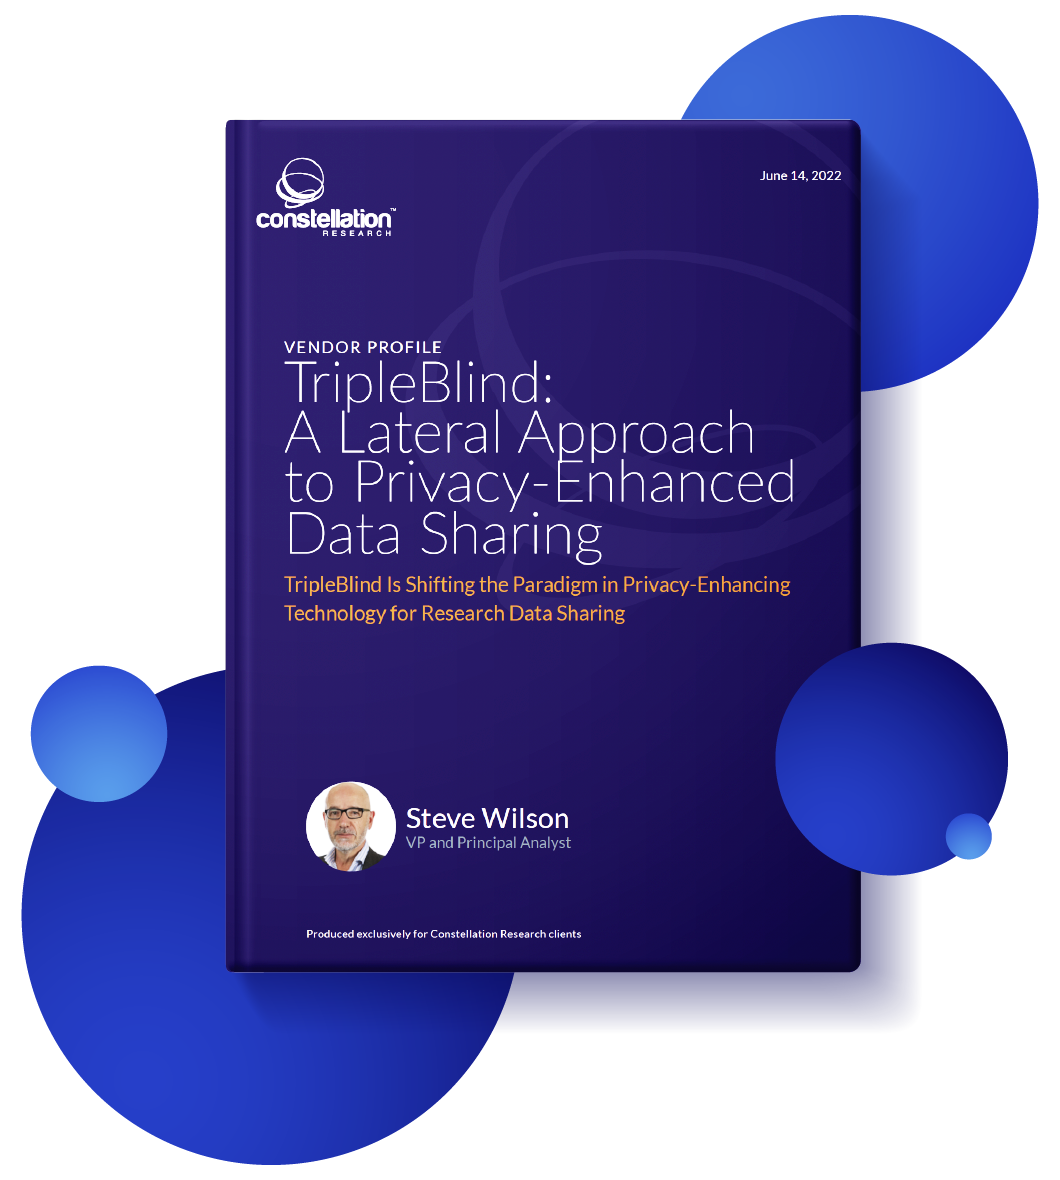 Constellation Research: TripleBlind a Lateral Approach to Privacy-Enhanced Data Sharing